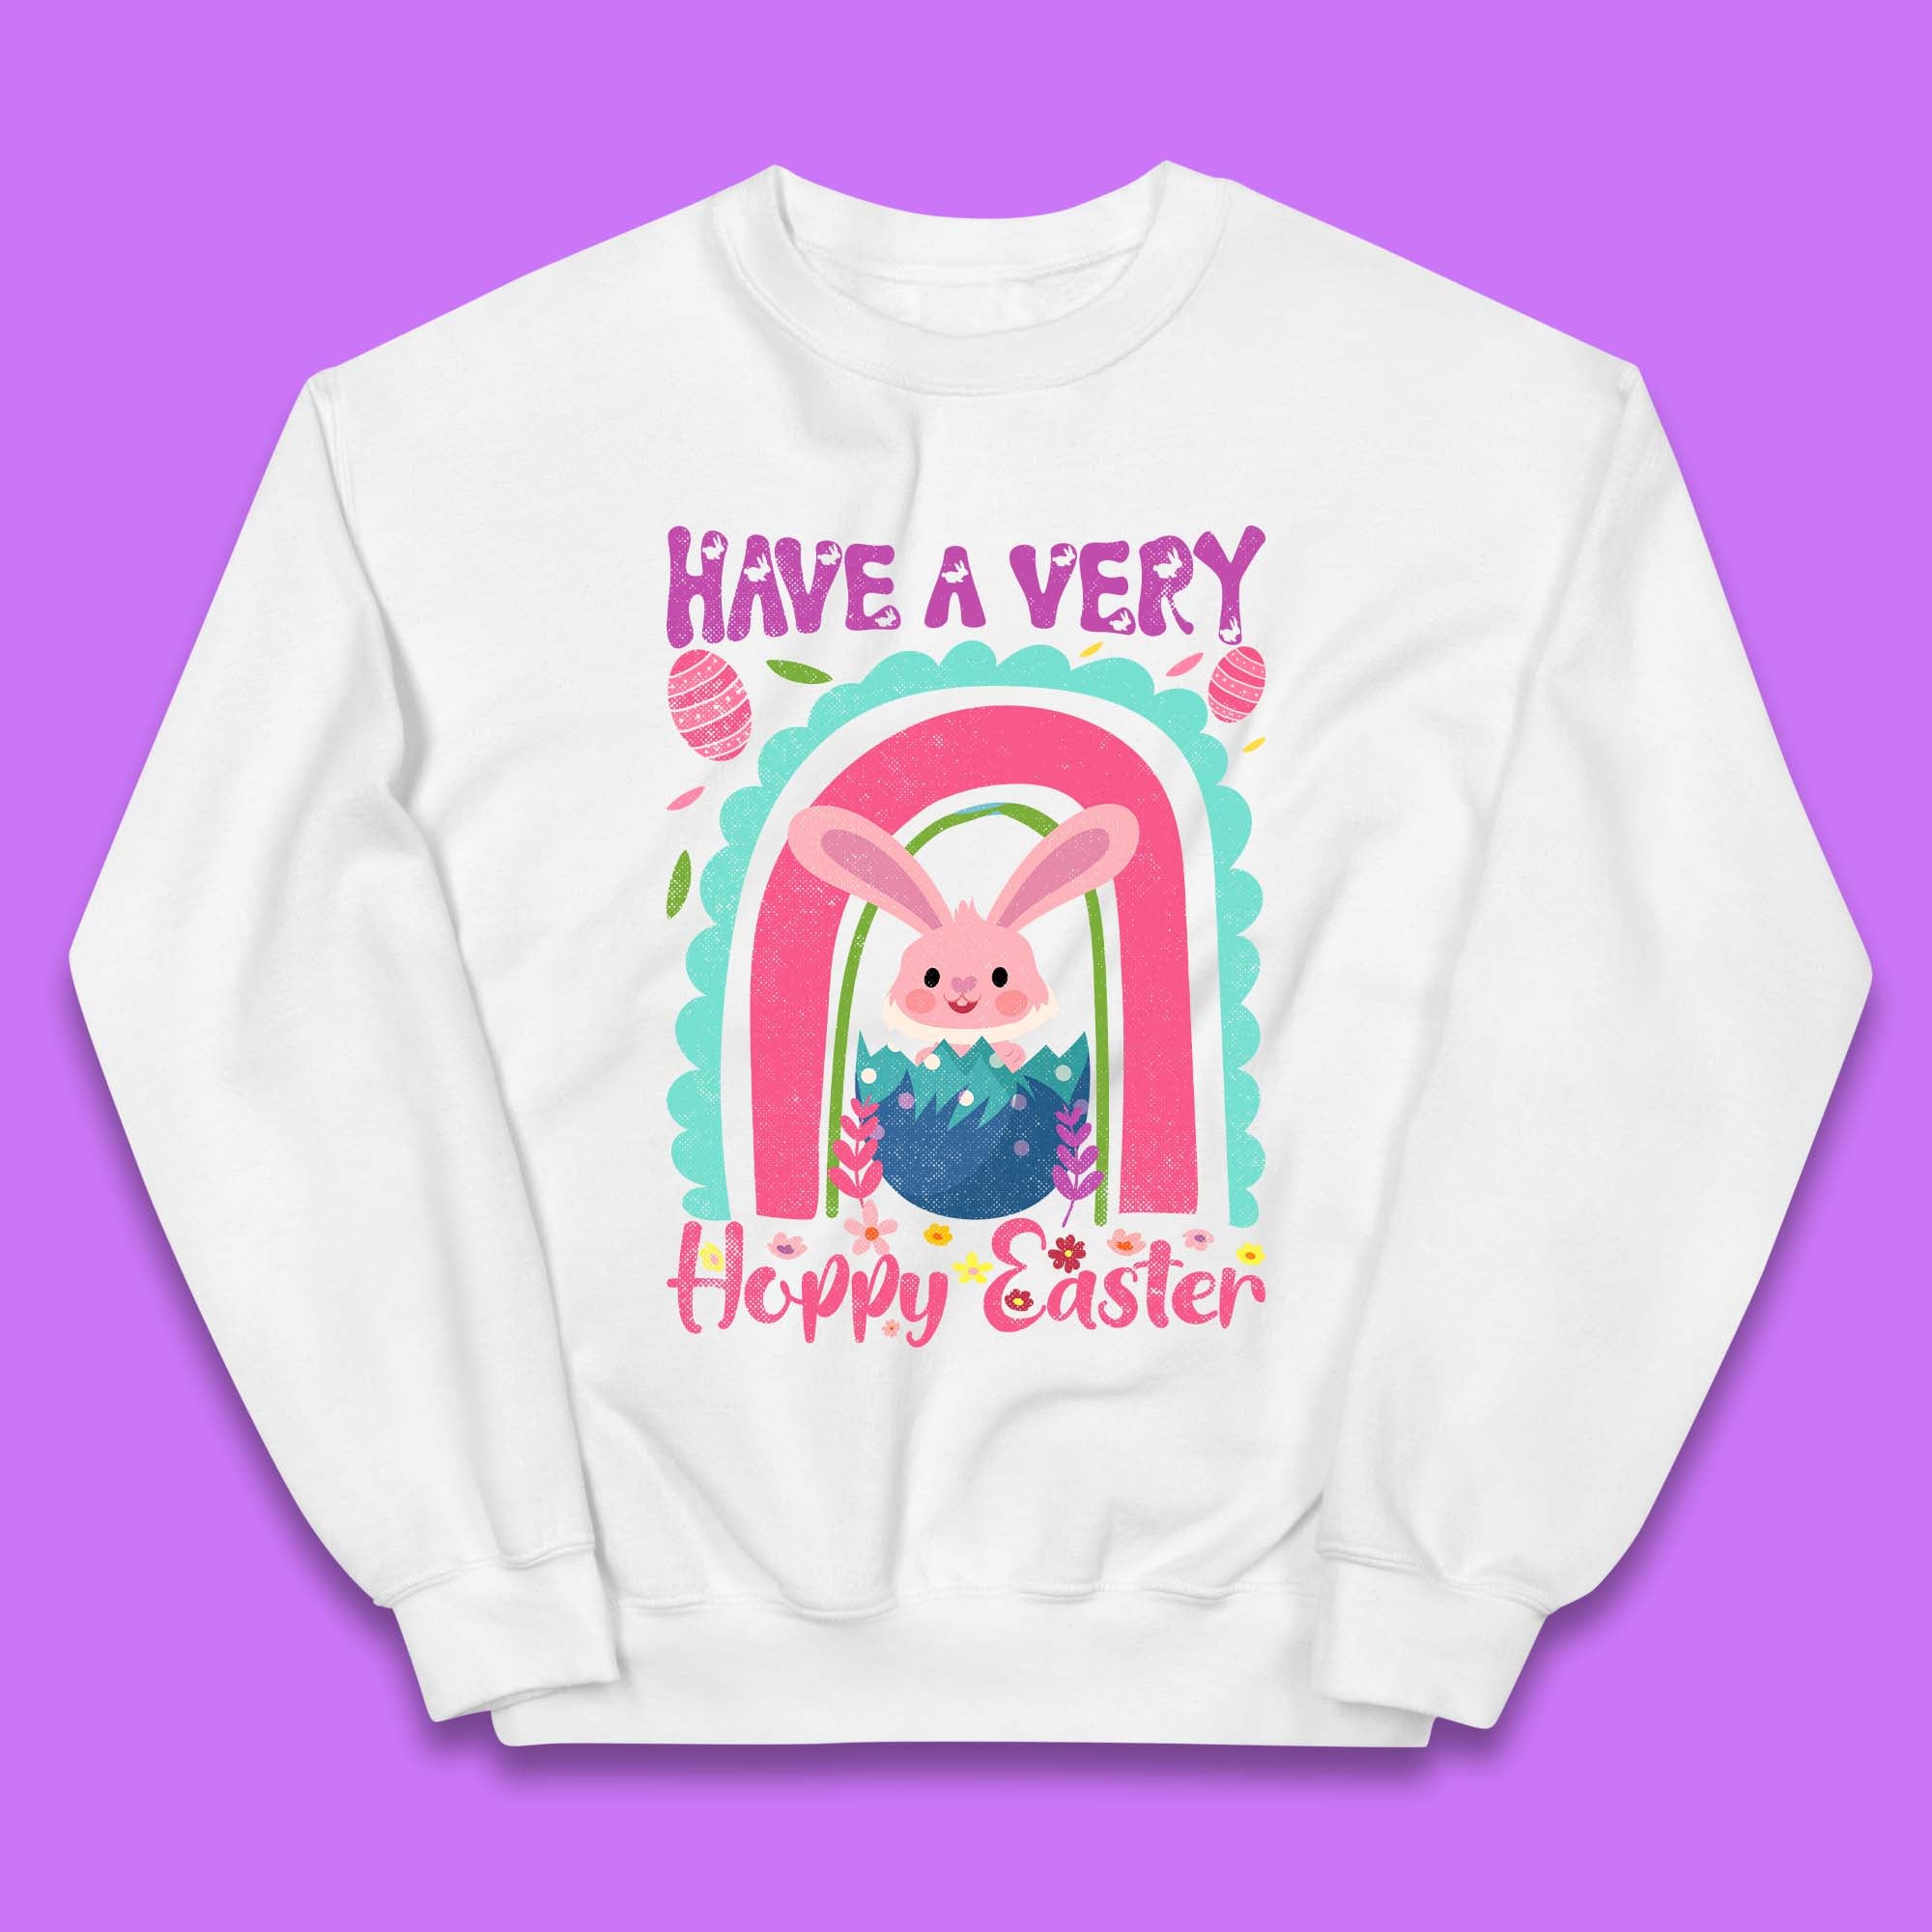 Have A Very Happy Easter Kids Jumper